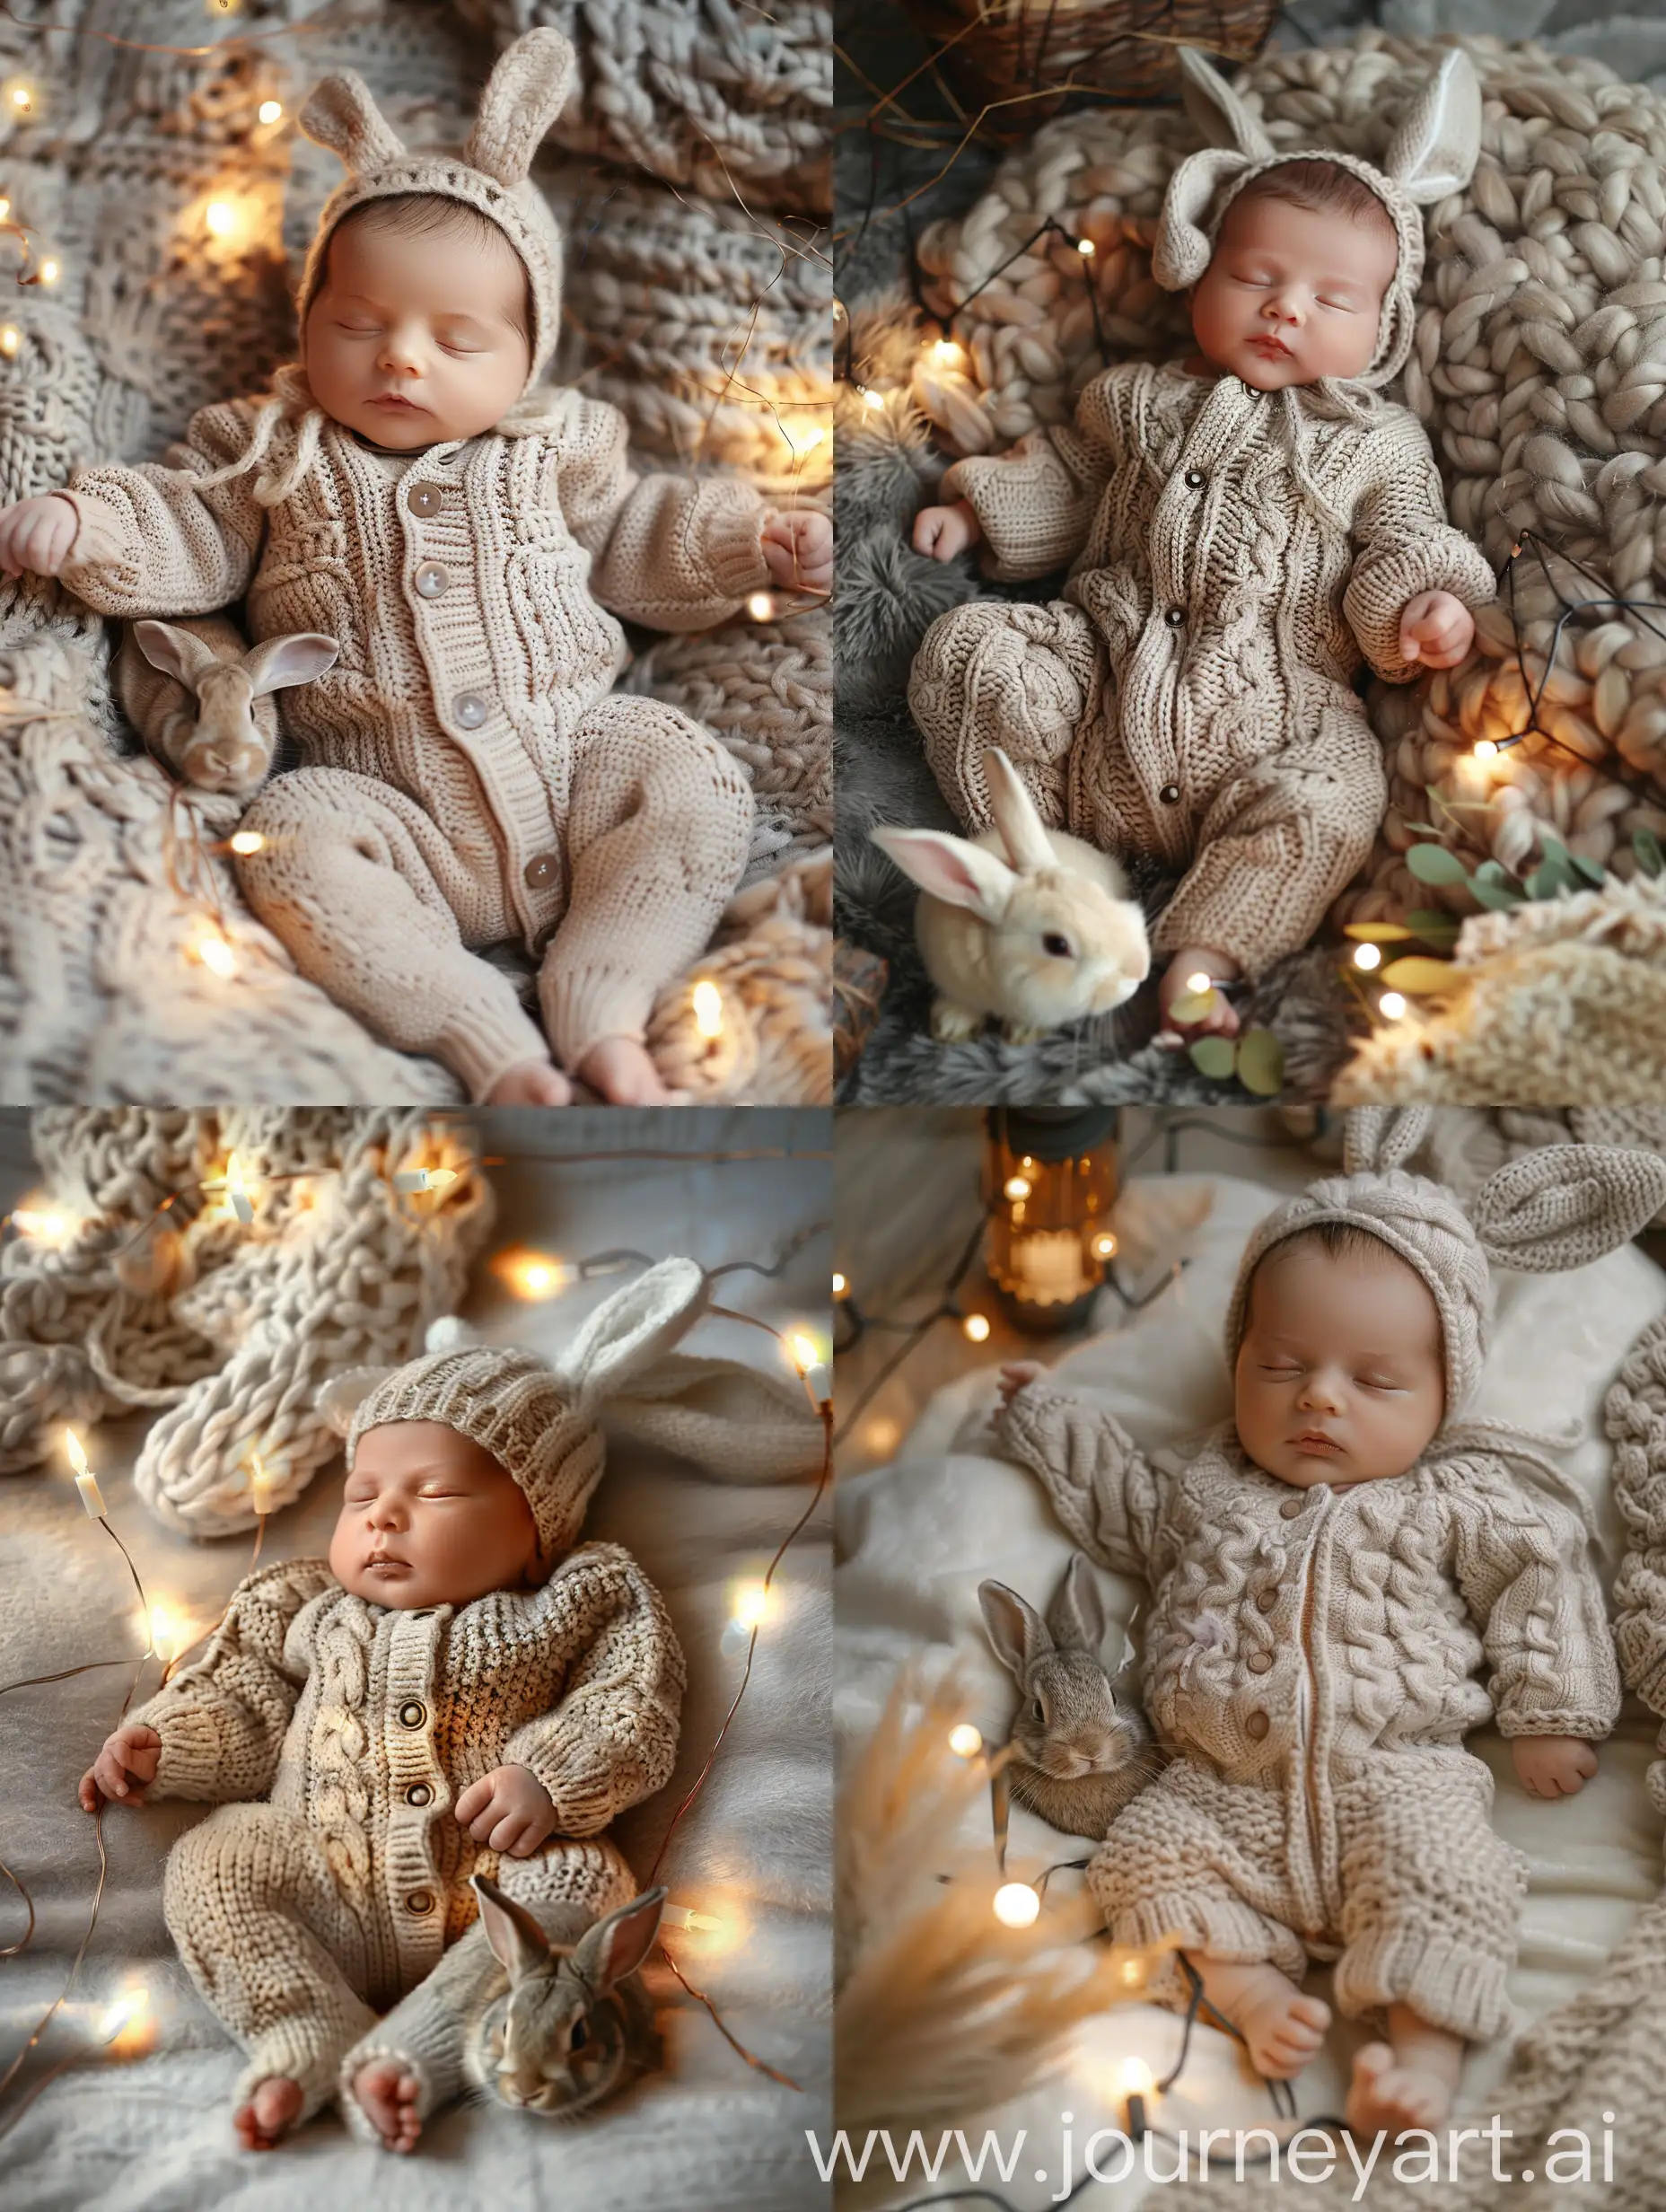 Adorable-Baby-in-Bunny-Knitted-Suit-with-Rabbit-Companion-in-Warm-Glowing-Light